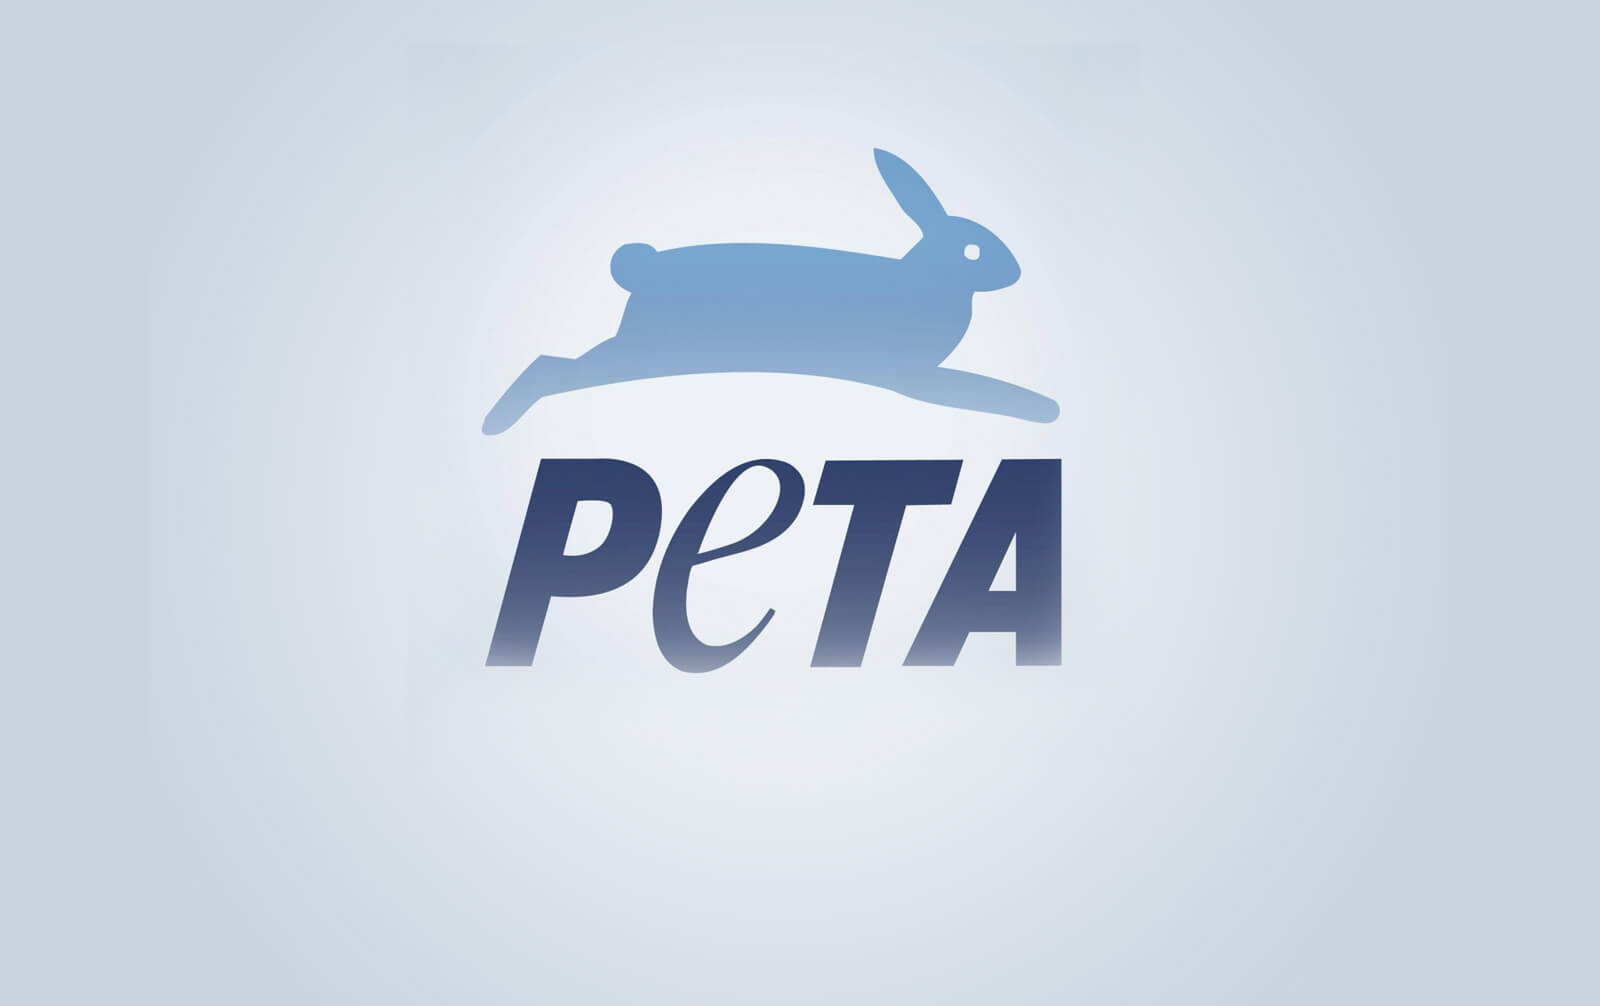 peta facebook placeholder new Animal Allies Will BBQ a ‘Baby’ for Easter Near Public Market